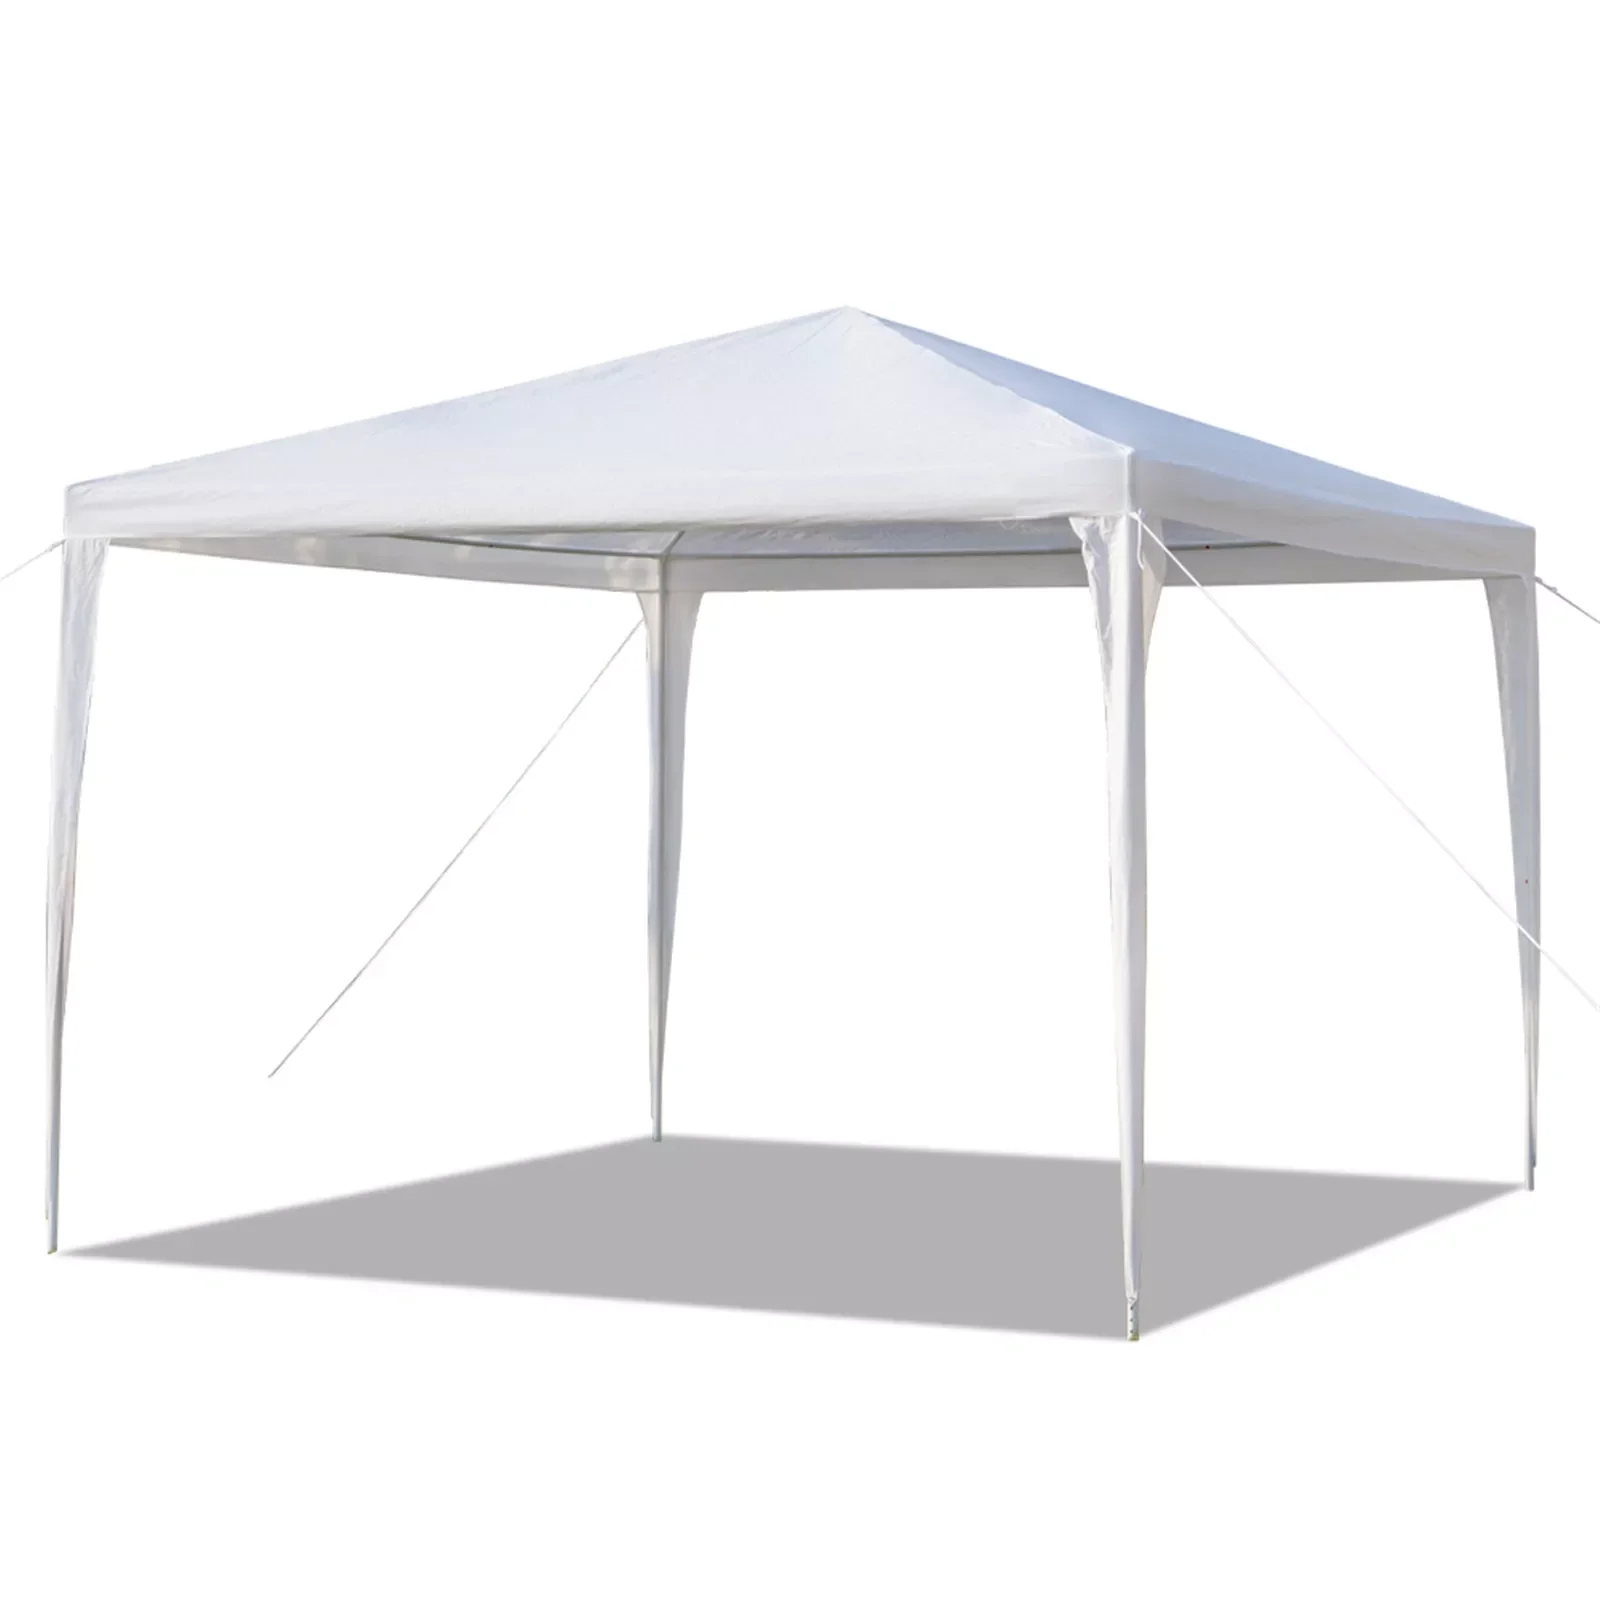 NEW 3x3m Outdoor Camping Waterproof Tent With Spiral Tubes White Gazebo PE Cloth Pergola US Fast Delivery